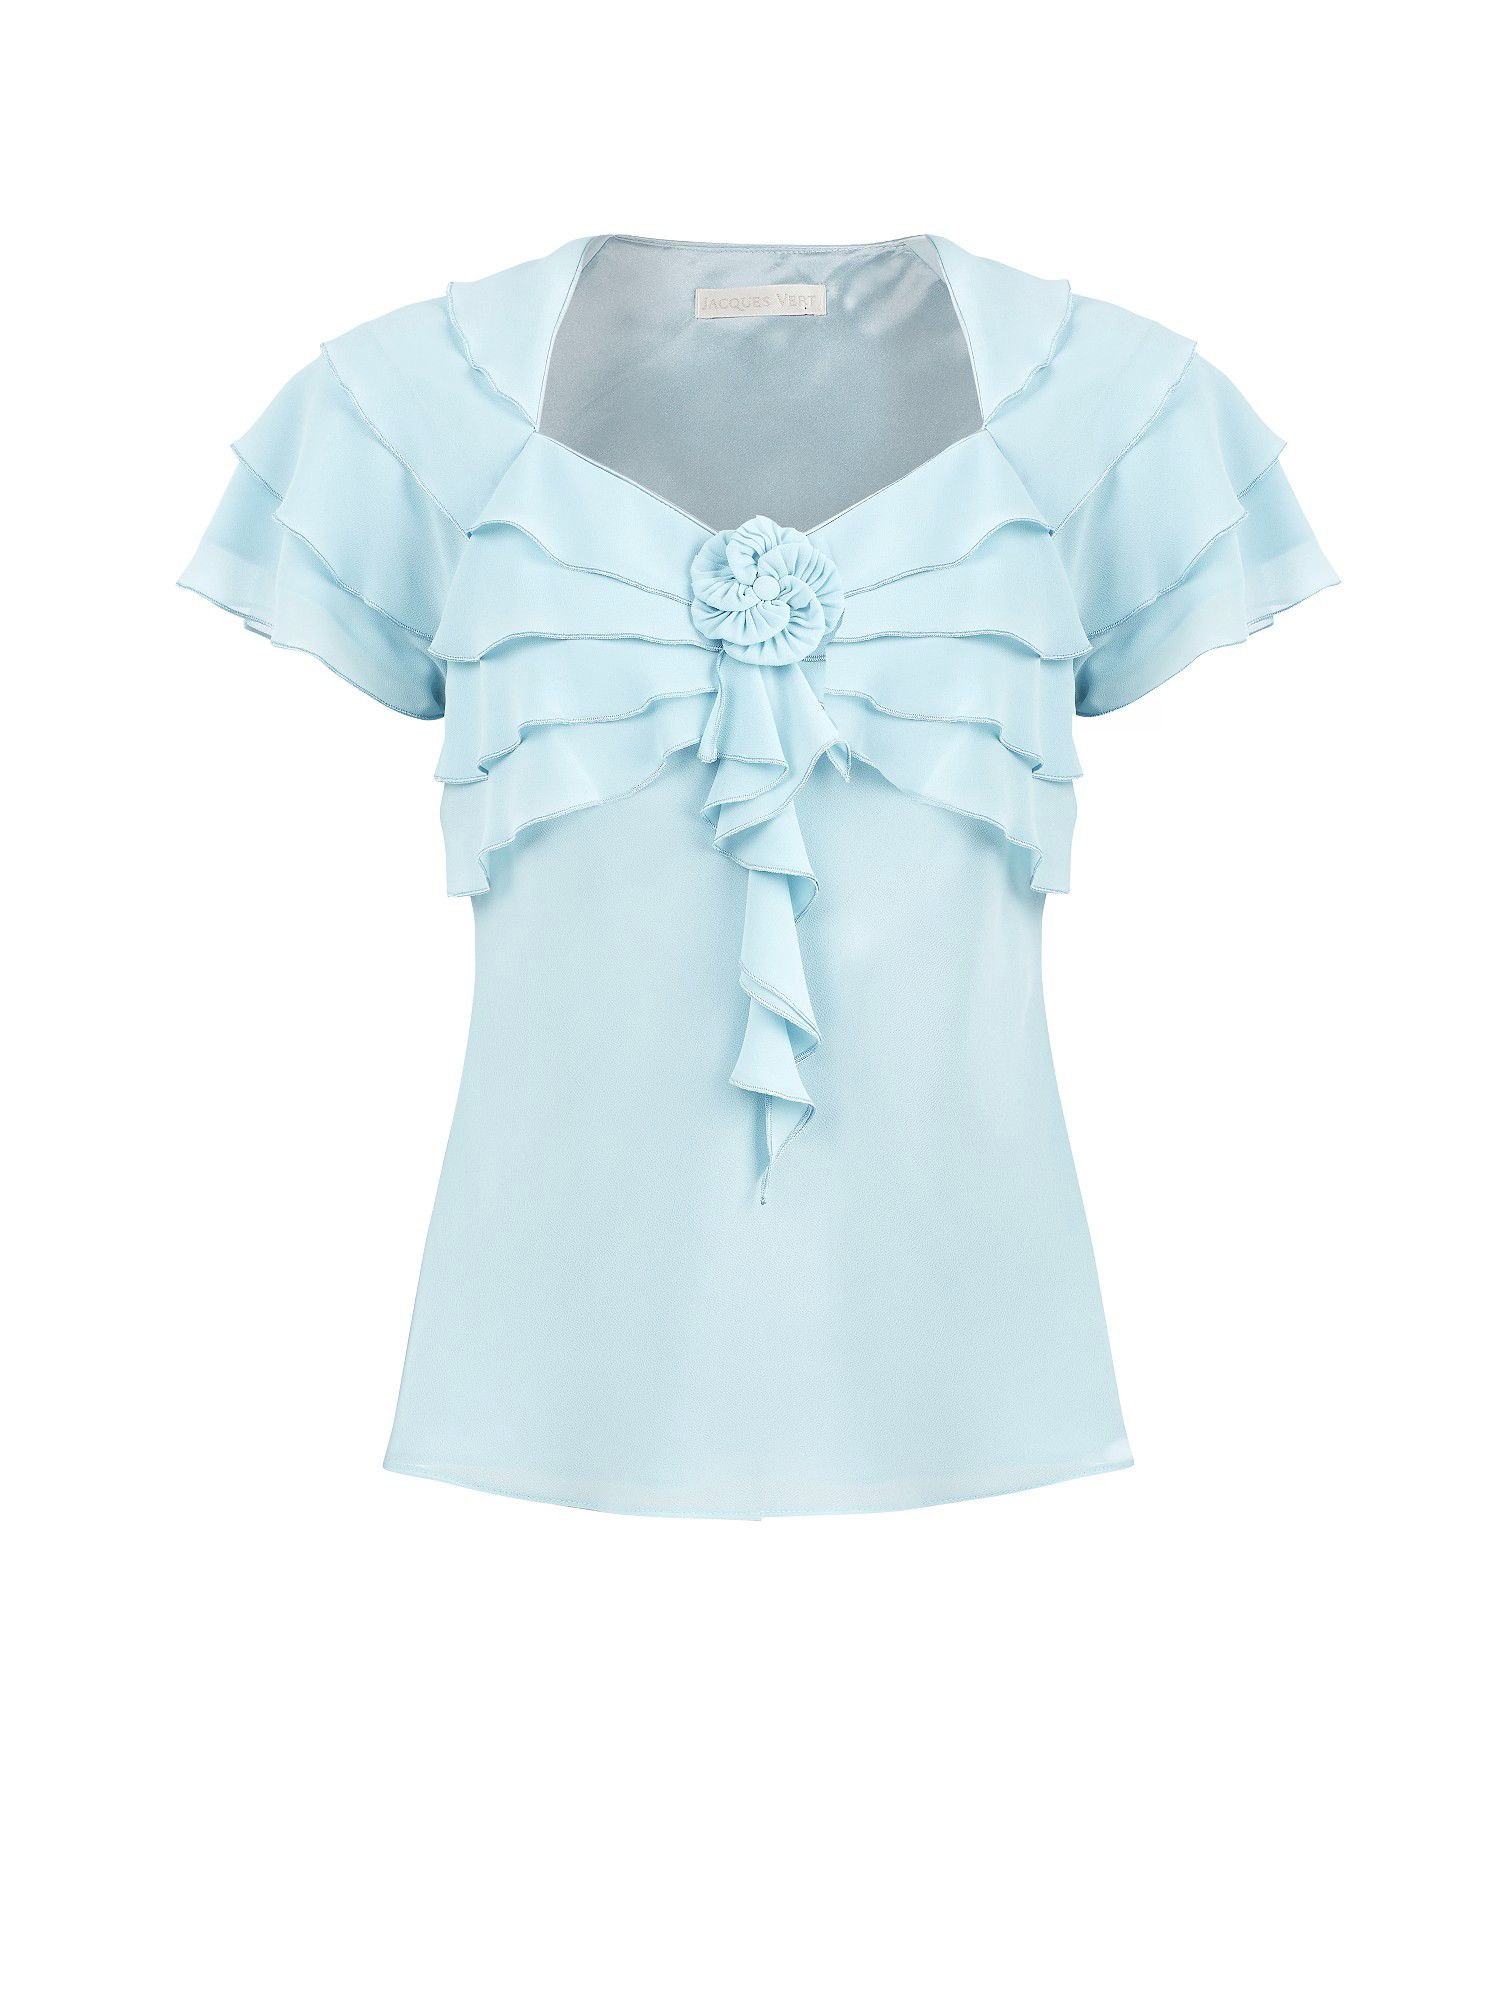 Jacques vert Pale Blue Frill Blouse in Blue | Lyst